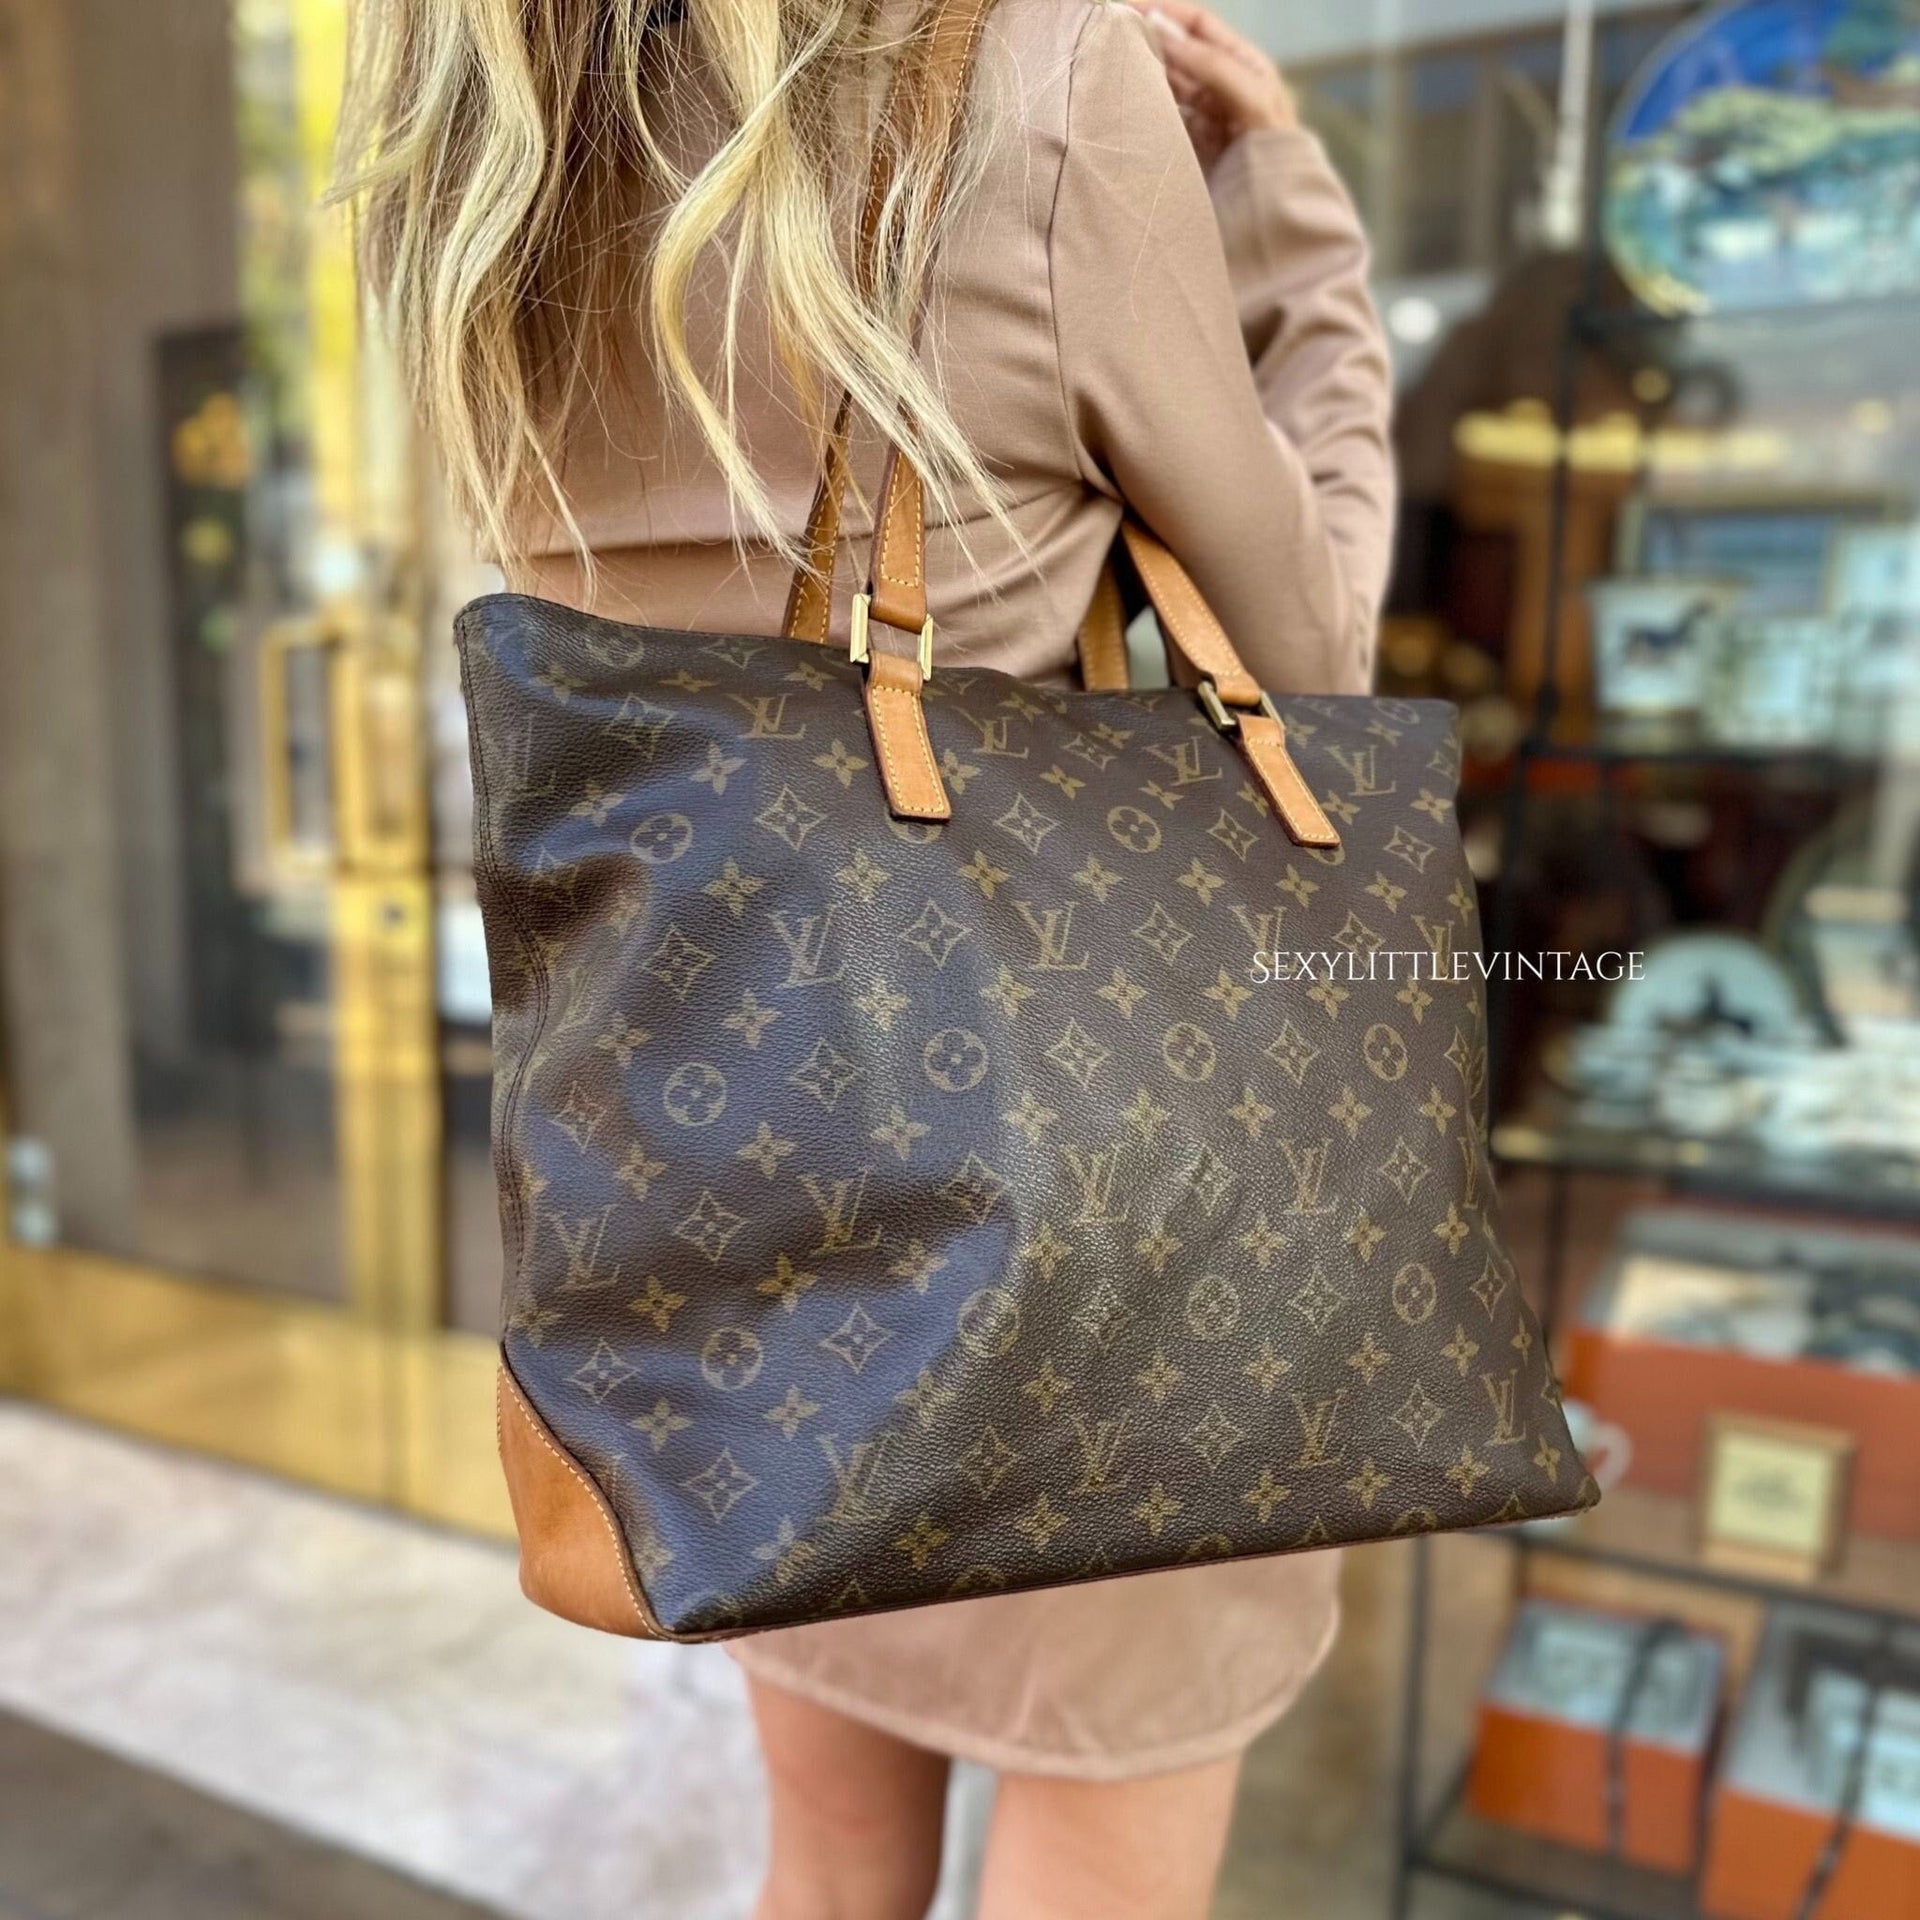 Louis Vuitton Cabas Mezzo Tote - Bags of CharmBags of Charm